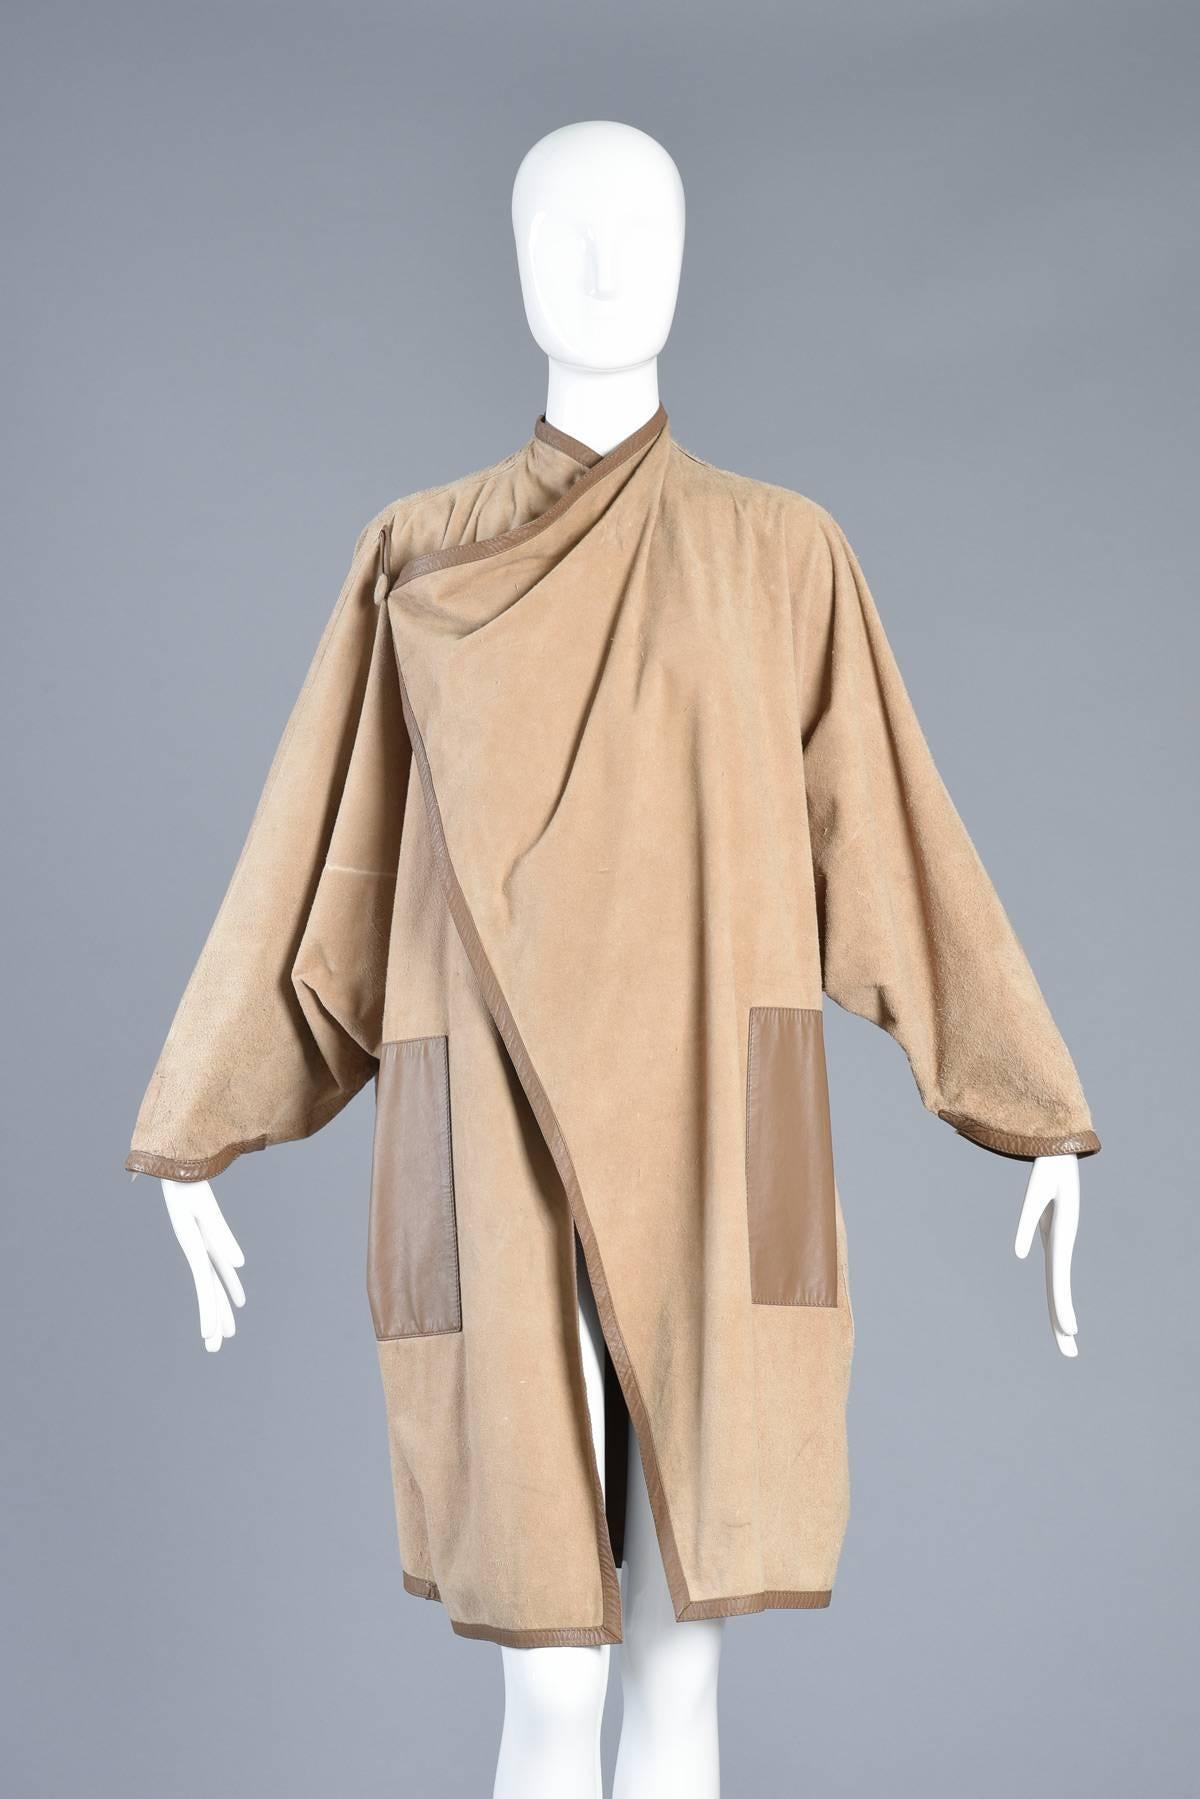 Beige Incredible 1980s Reversible Suede Leather Avant Garde Draped Cape For Sale